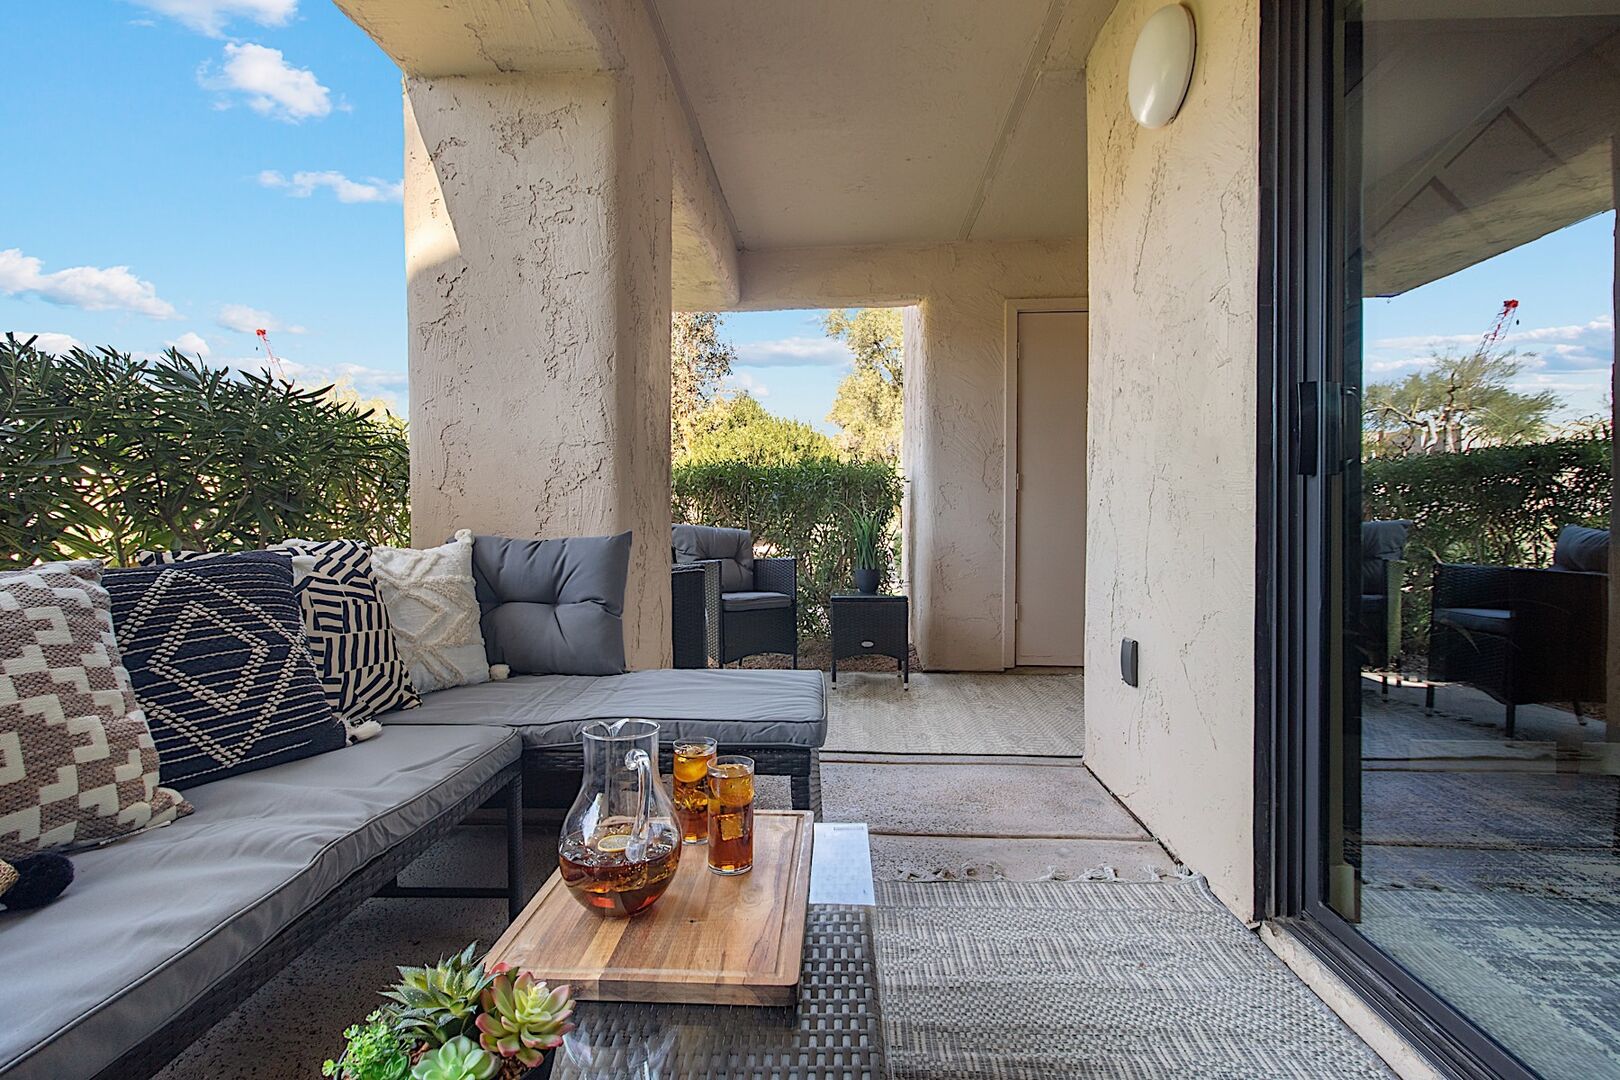 Private patio w/ L-shaped outdoor sofa, coffee table and two sitting chairs.